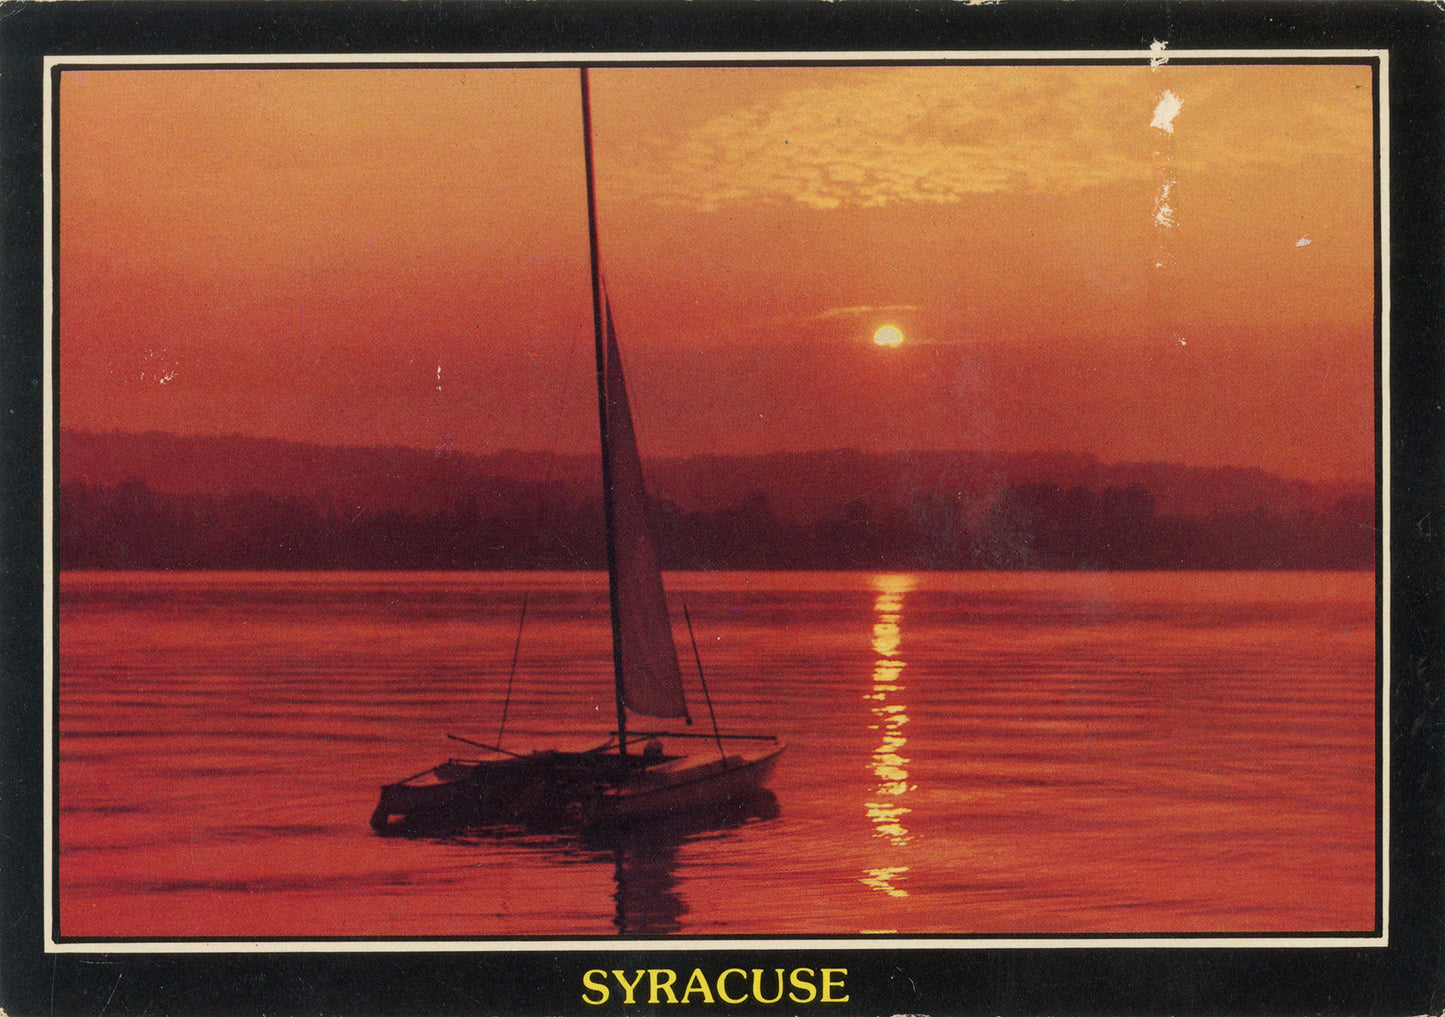 Postcard from Nikki Sixx to his grandparents from Syracuse